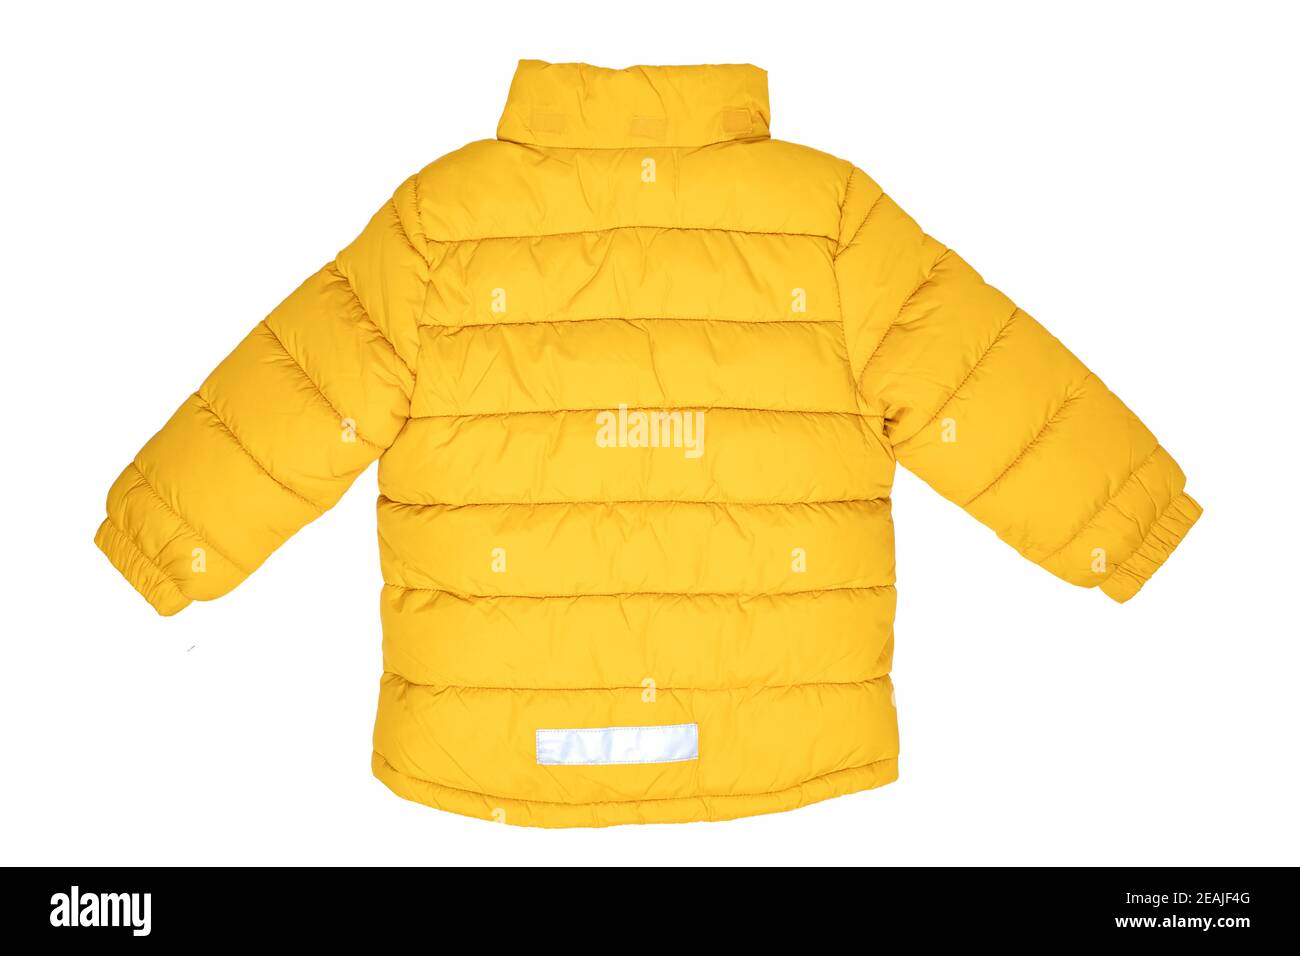 Winter jackets for children. Stylish, yellow, warm down jacket for children with removable hood, isolated on a white background. Winter fashion. Back view. Stock Photo